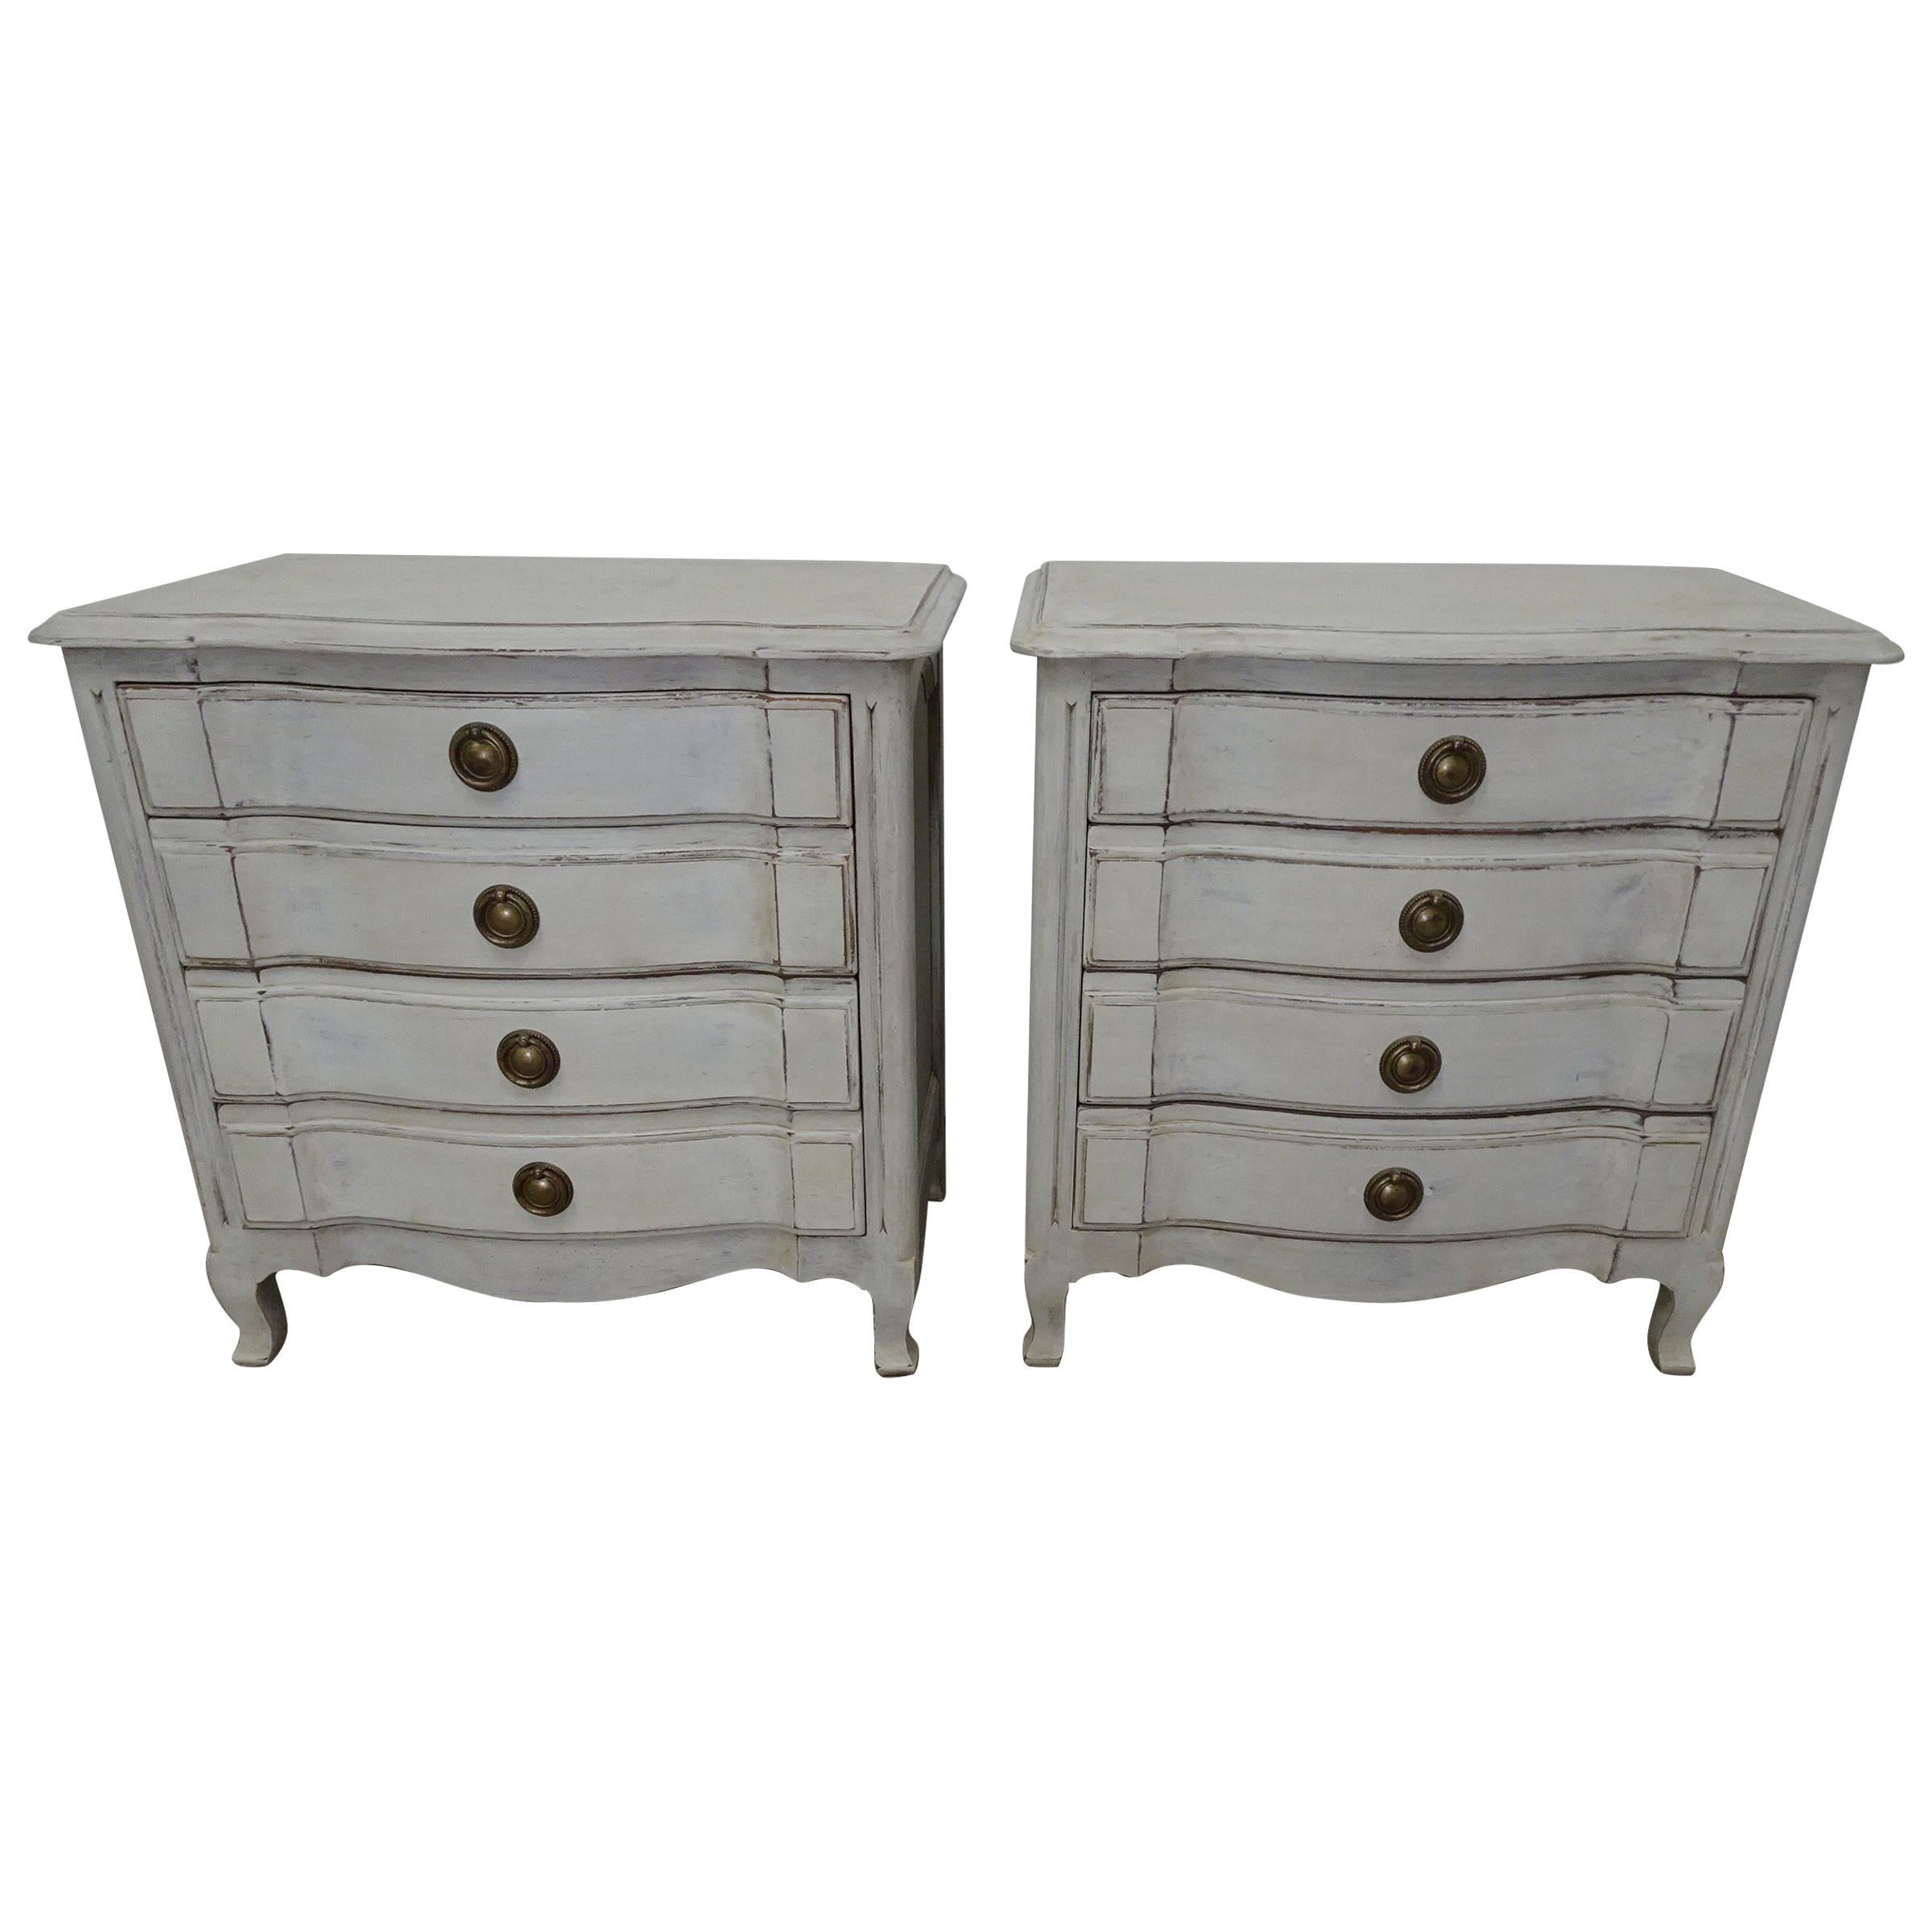 Pair of Rococo Style Nightstands